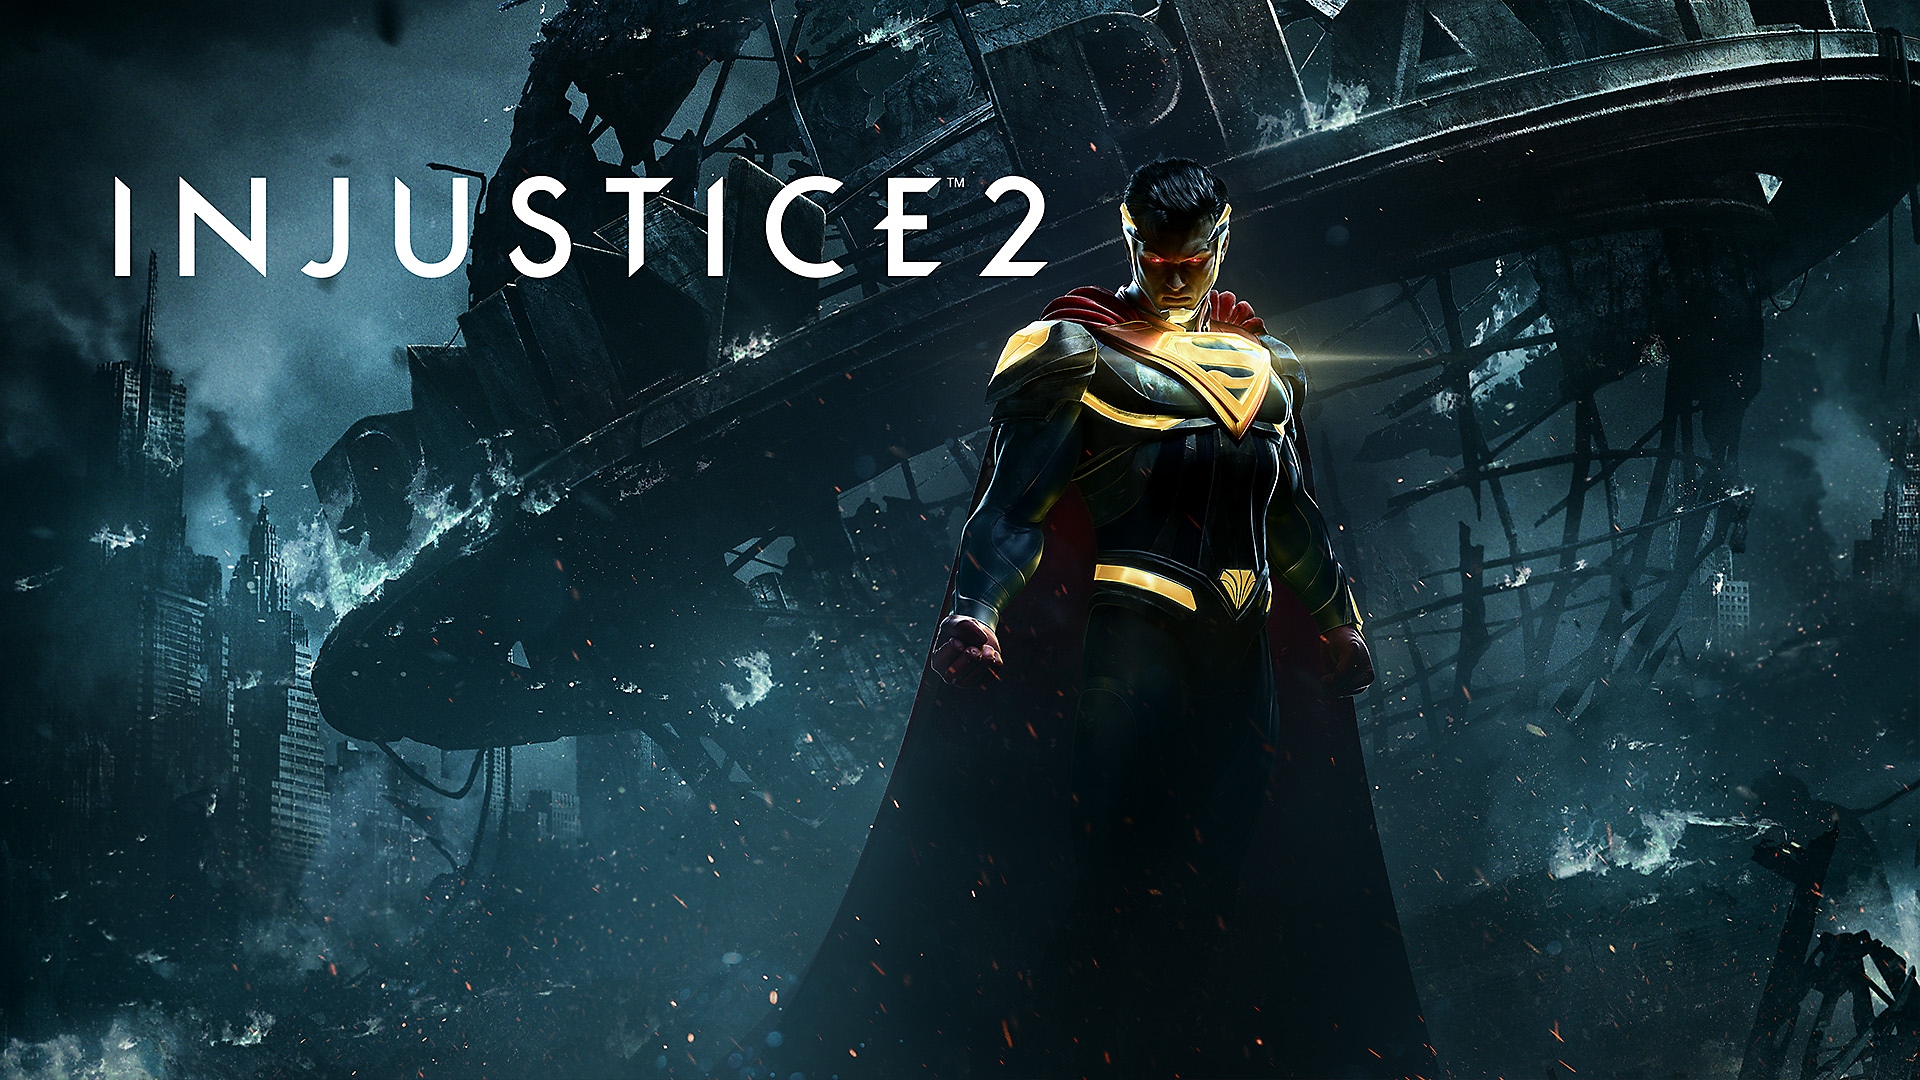 Video ze hry Injustice 2